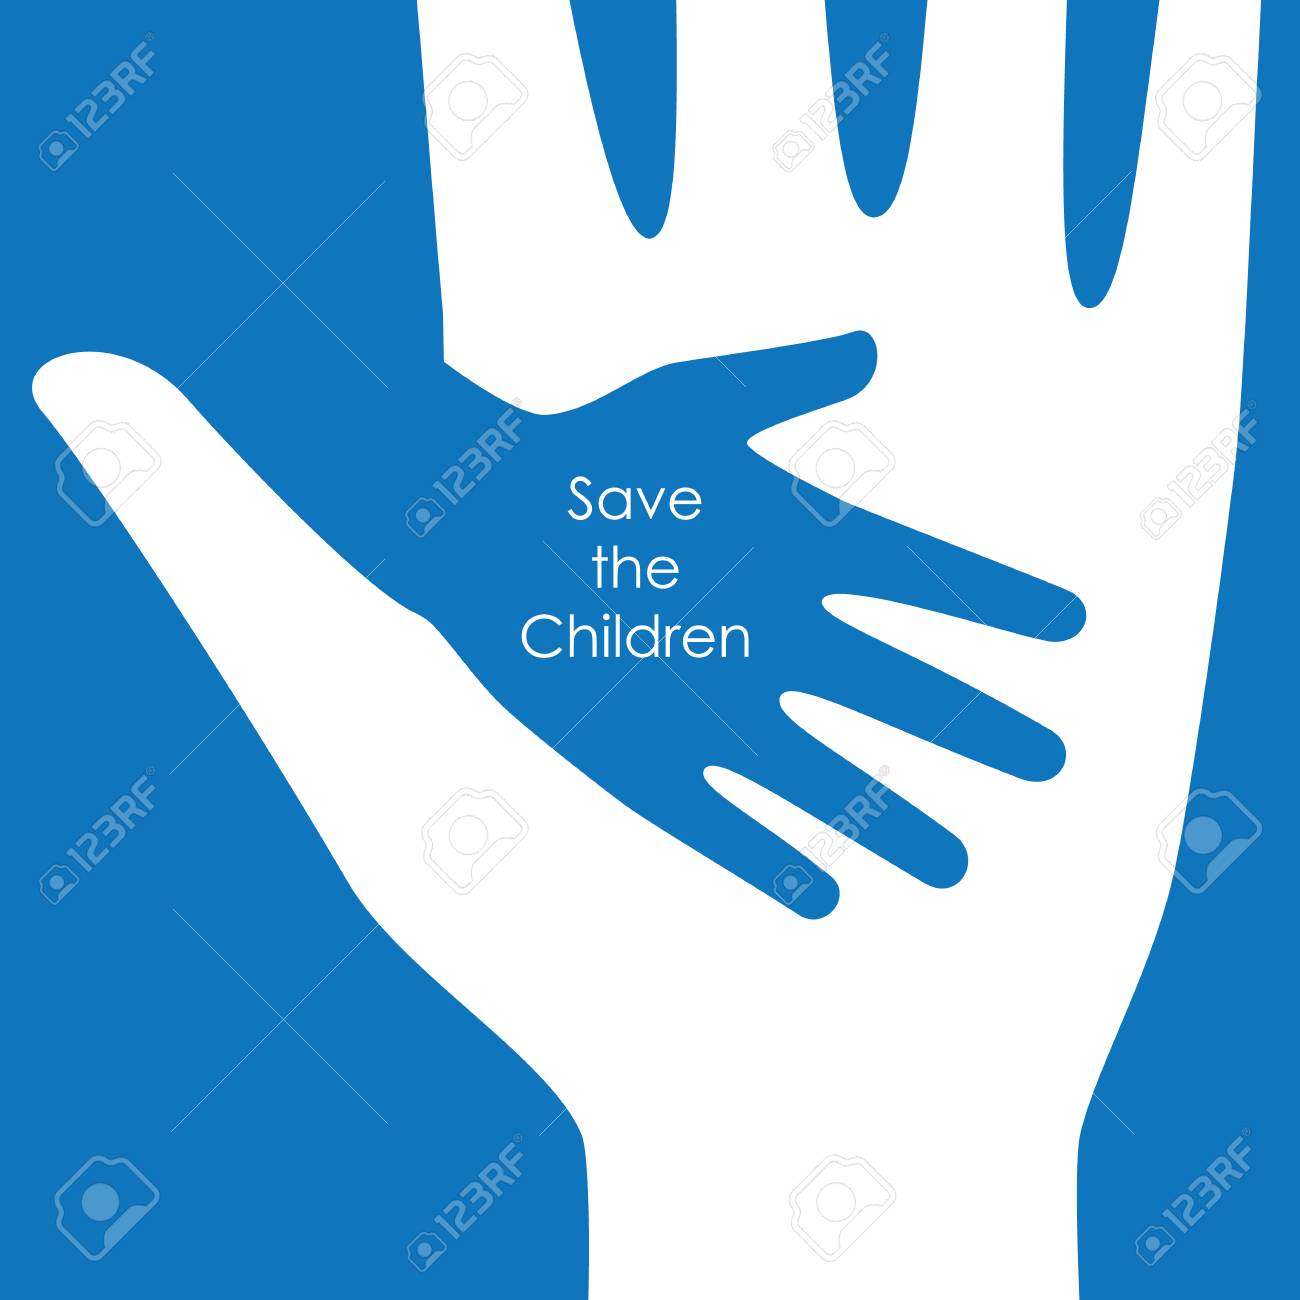 Helping Hands For Children Concept Background And Logo Vector